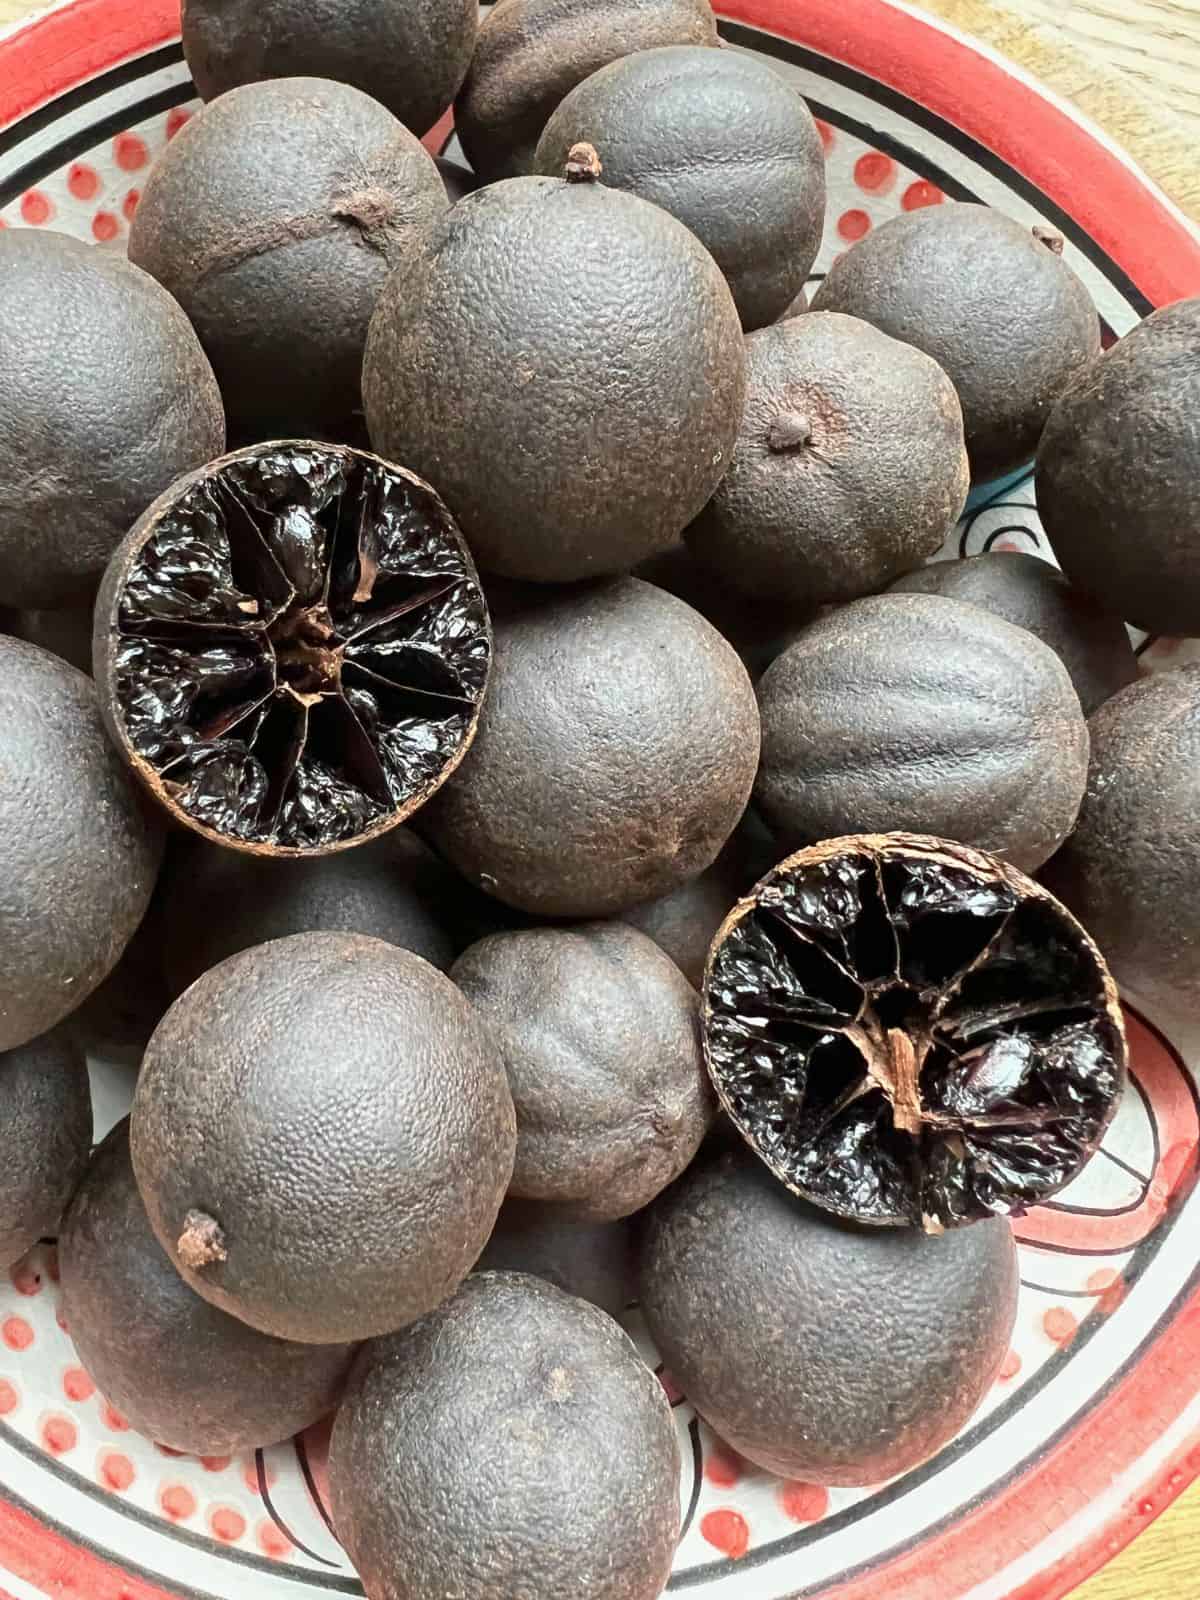 Bowl full of dried black limes with one halved showing interior.